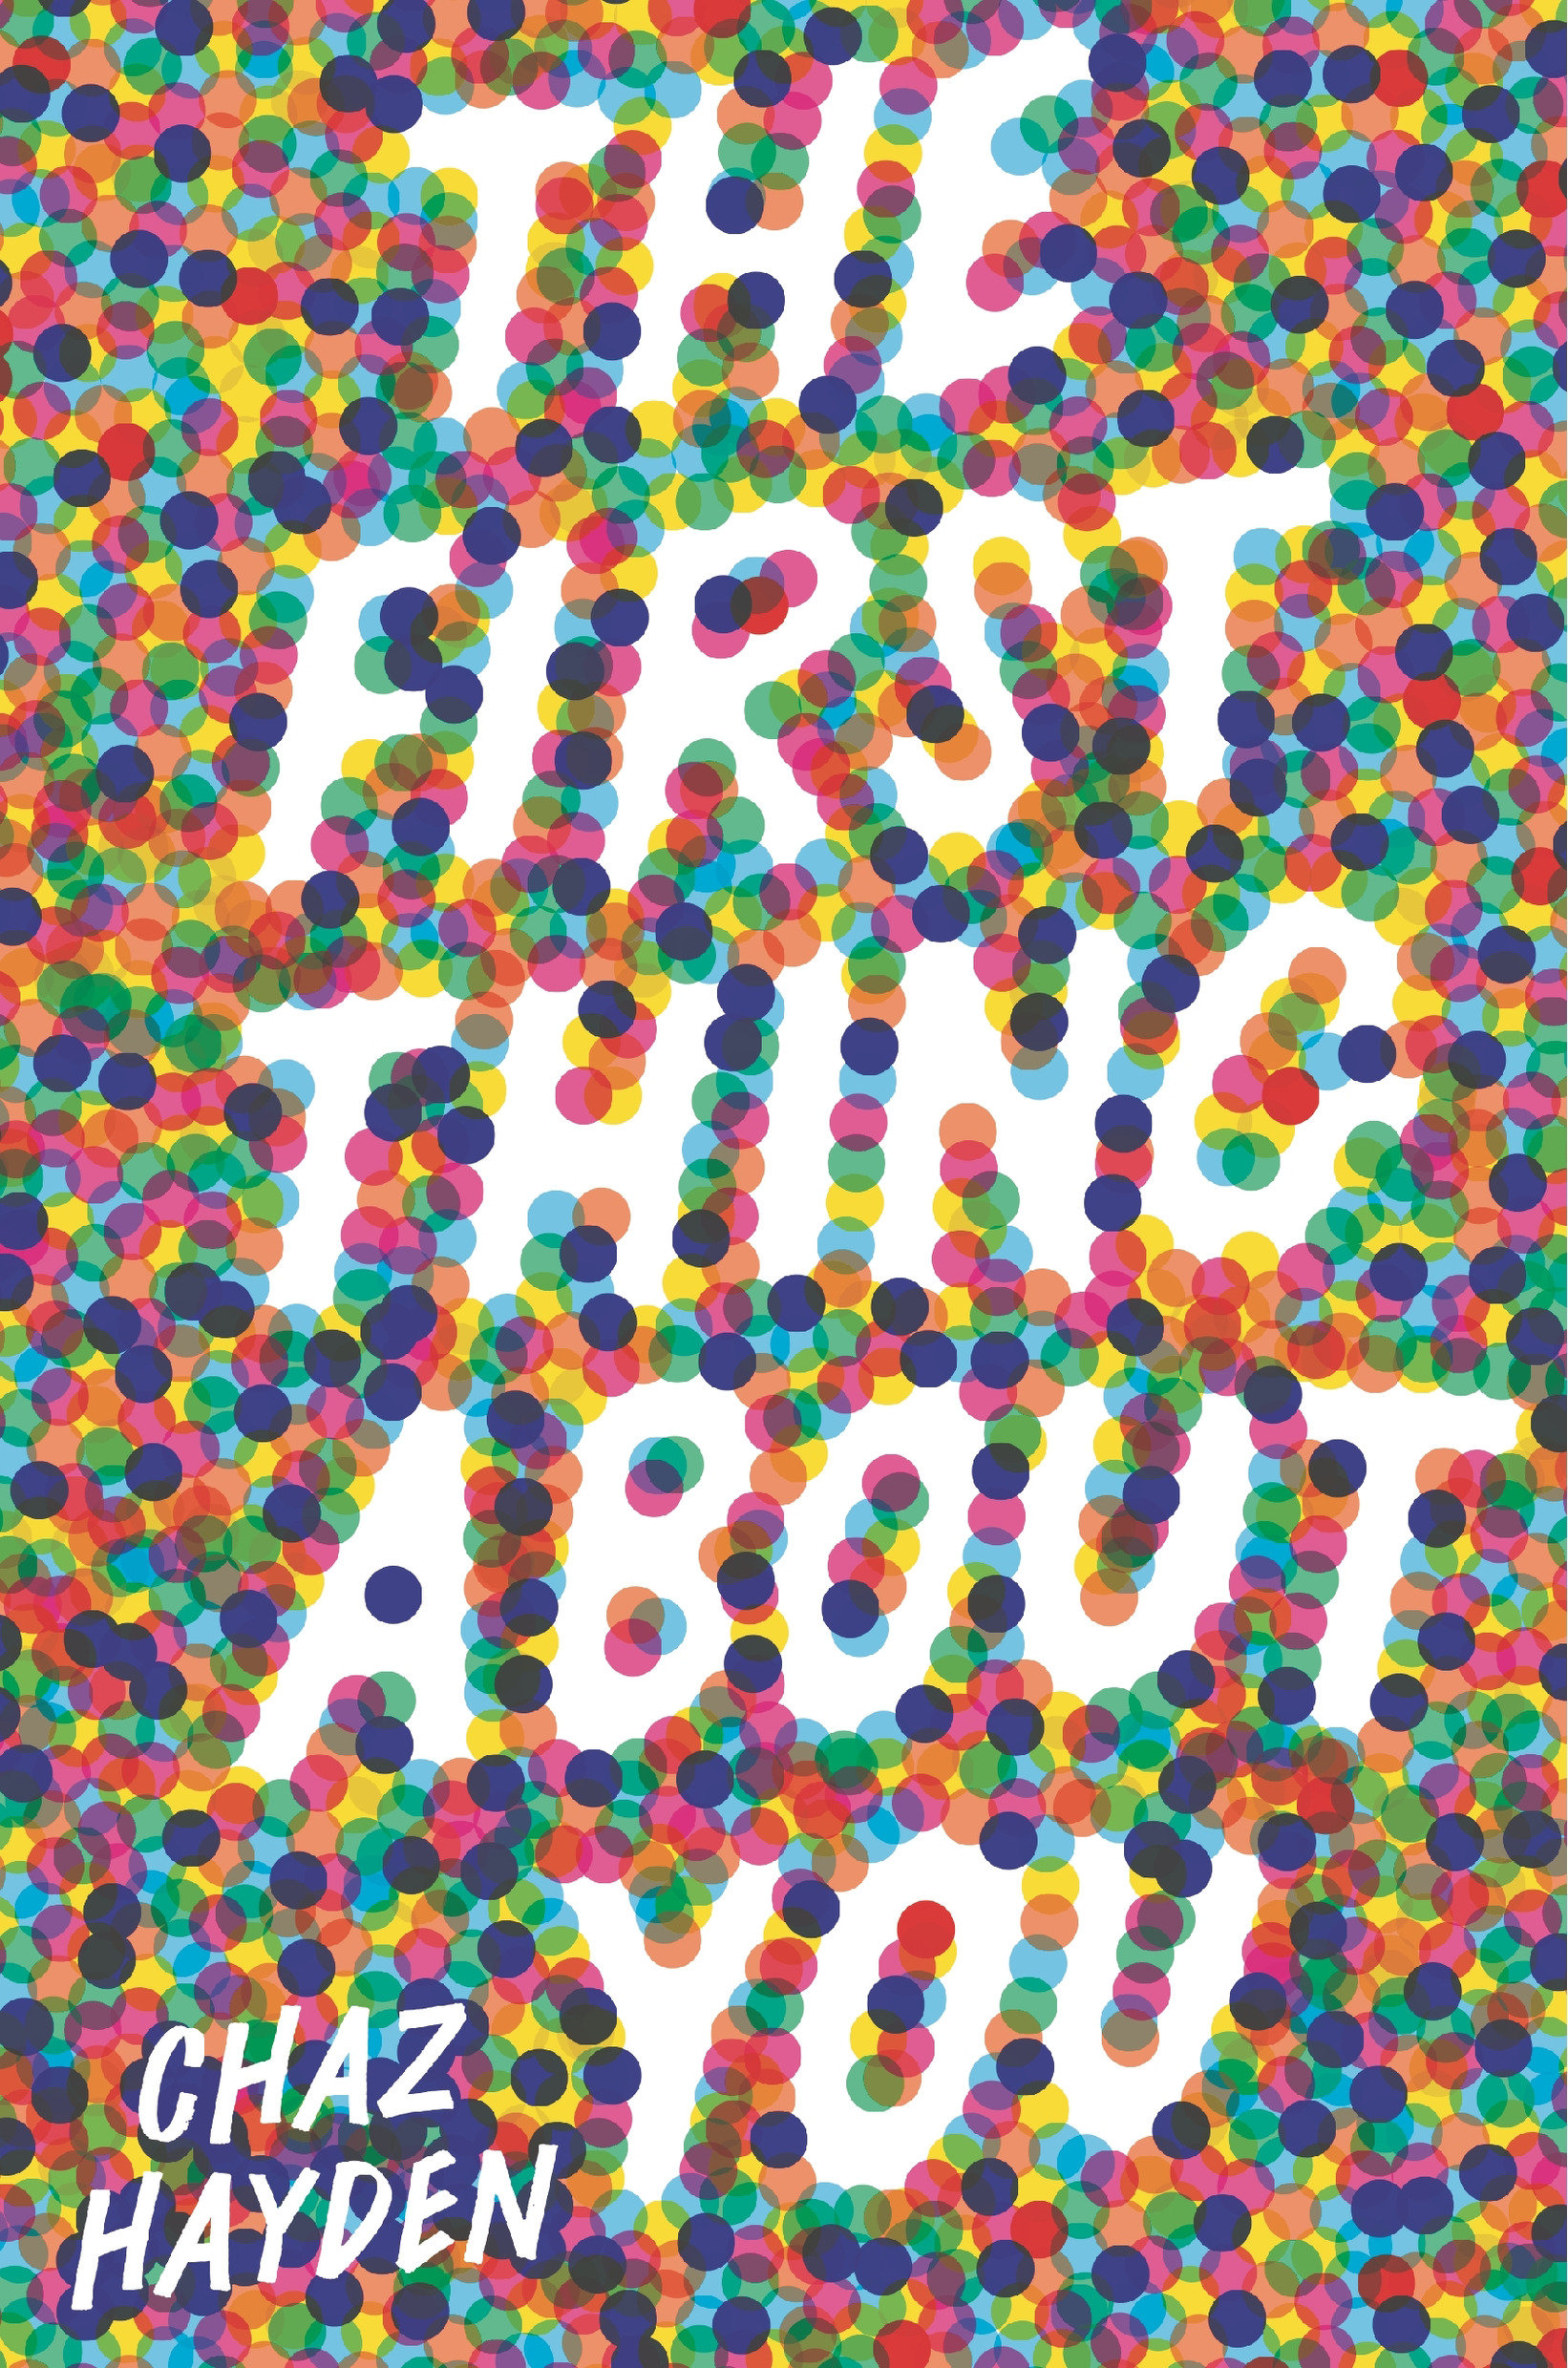 The First Thing About You (Hardcover Book)